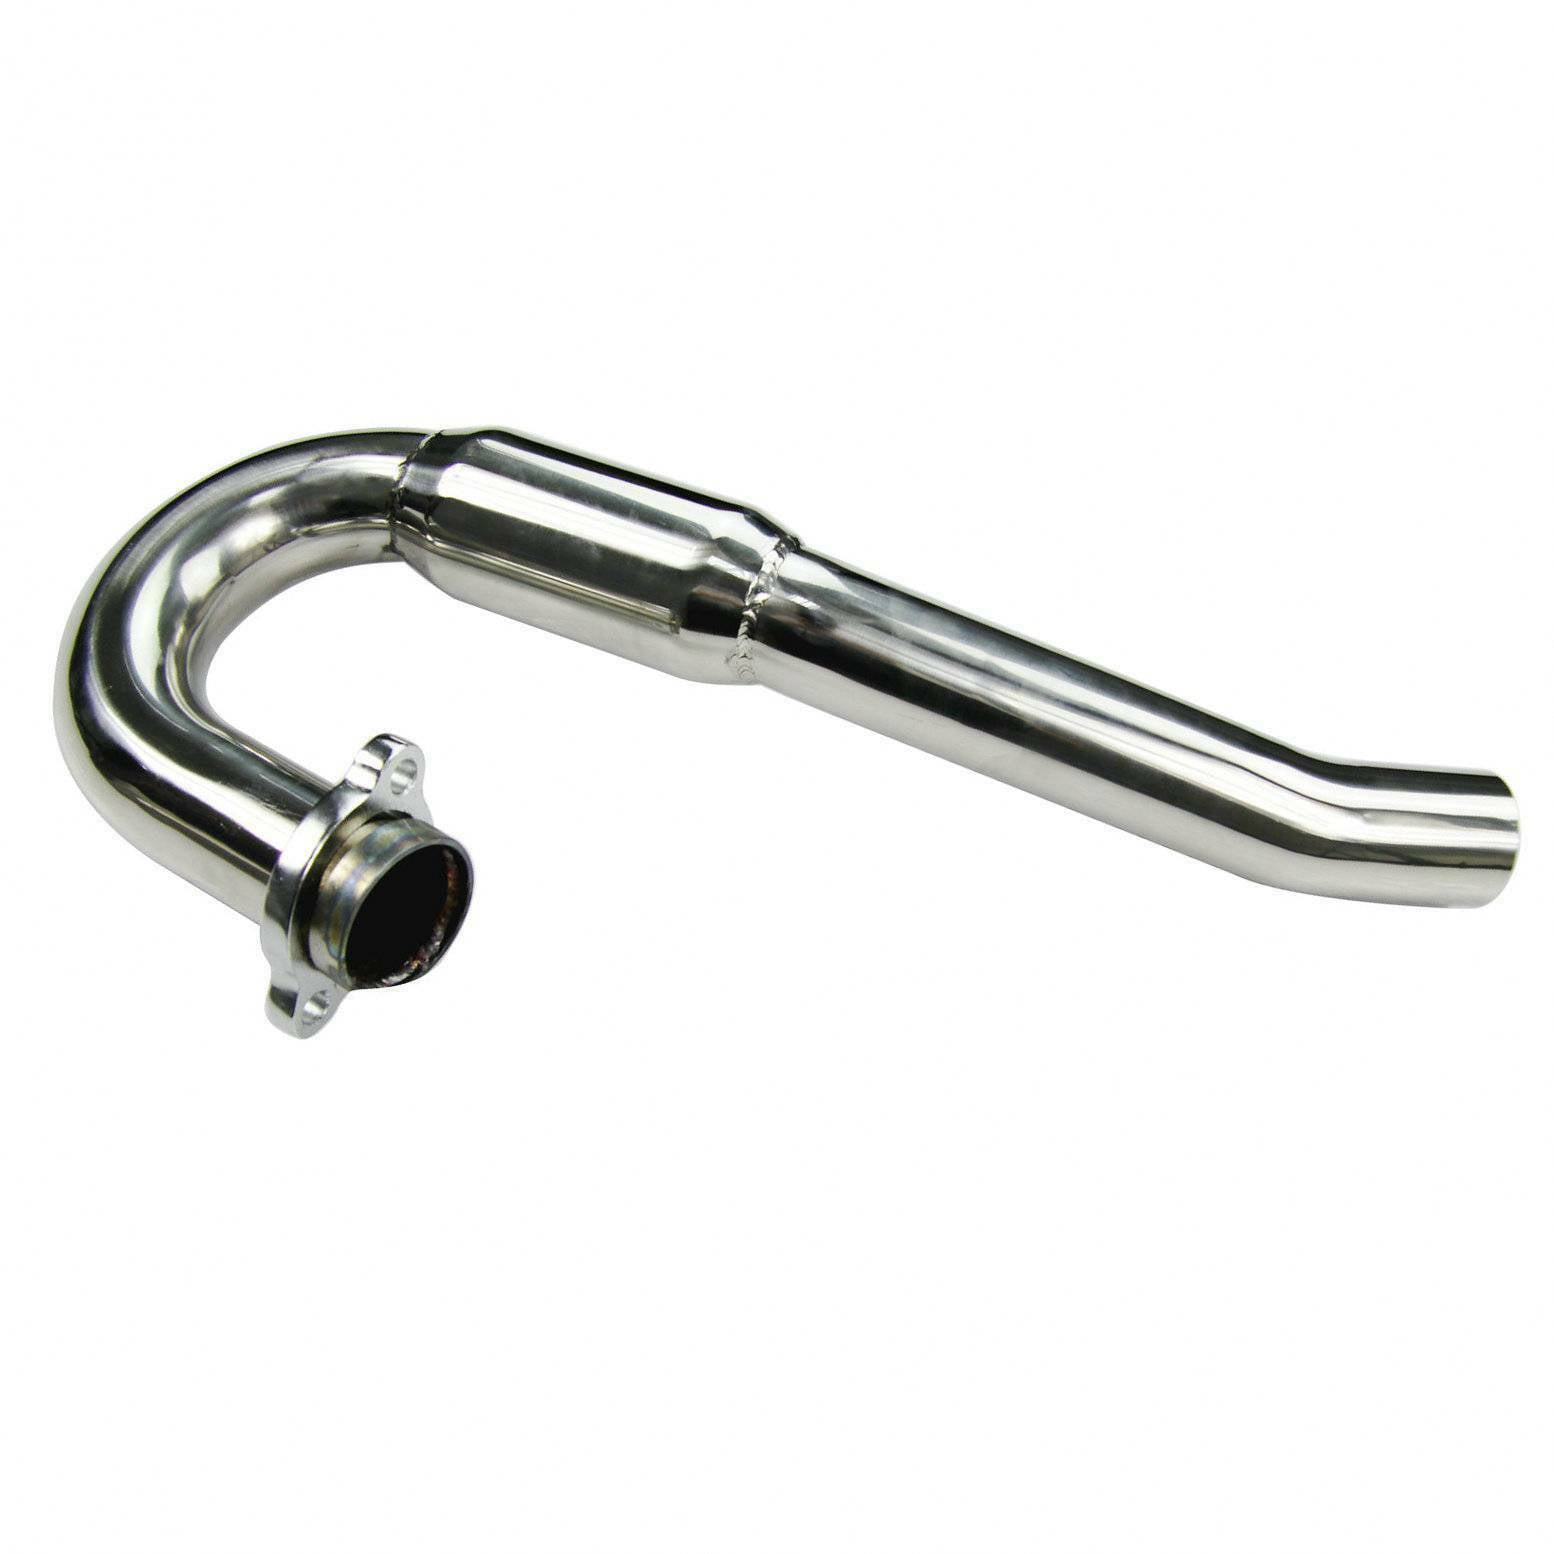 Stainless Steel Exhaust Header Pipe Head For Honda CRF450R 2006-2007 CRF 450 R 